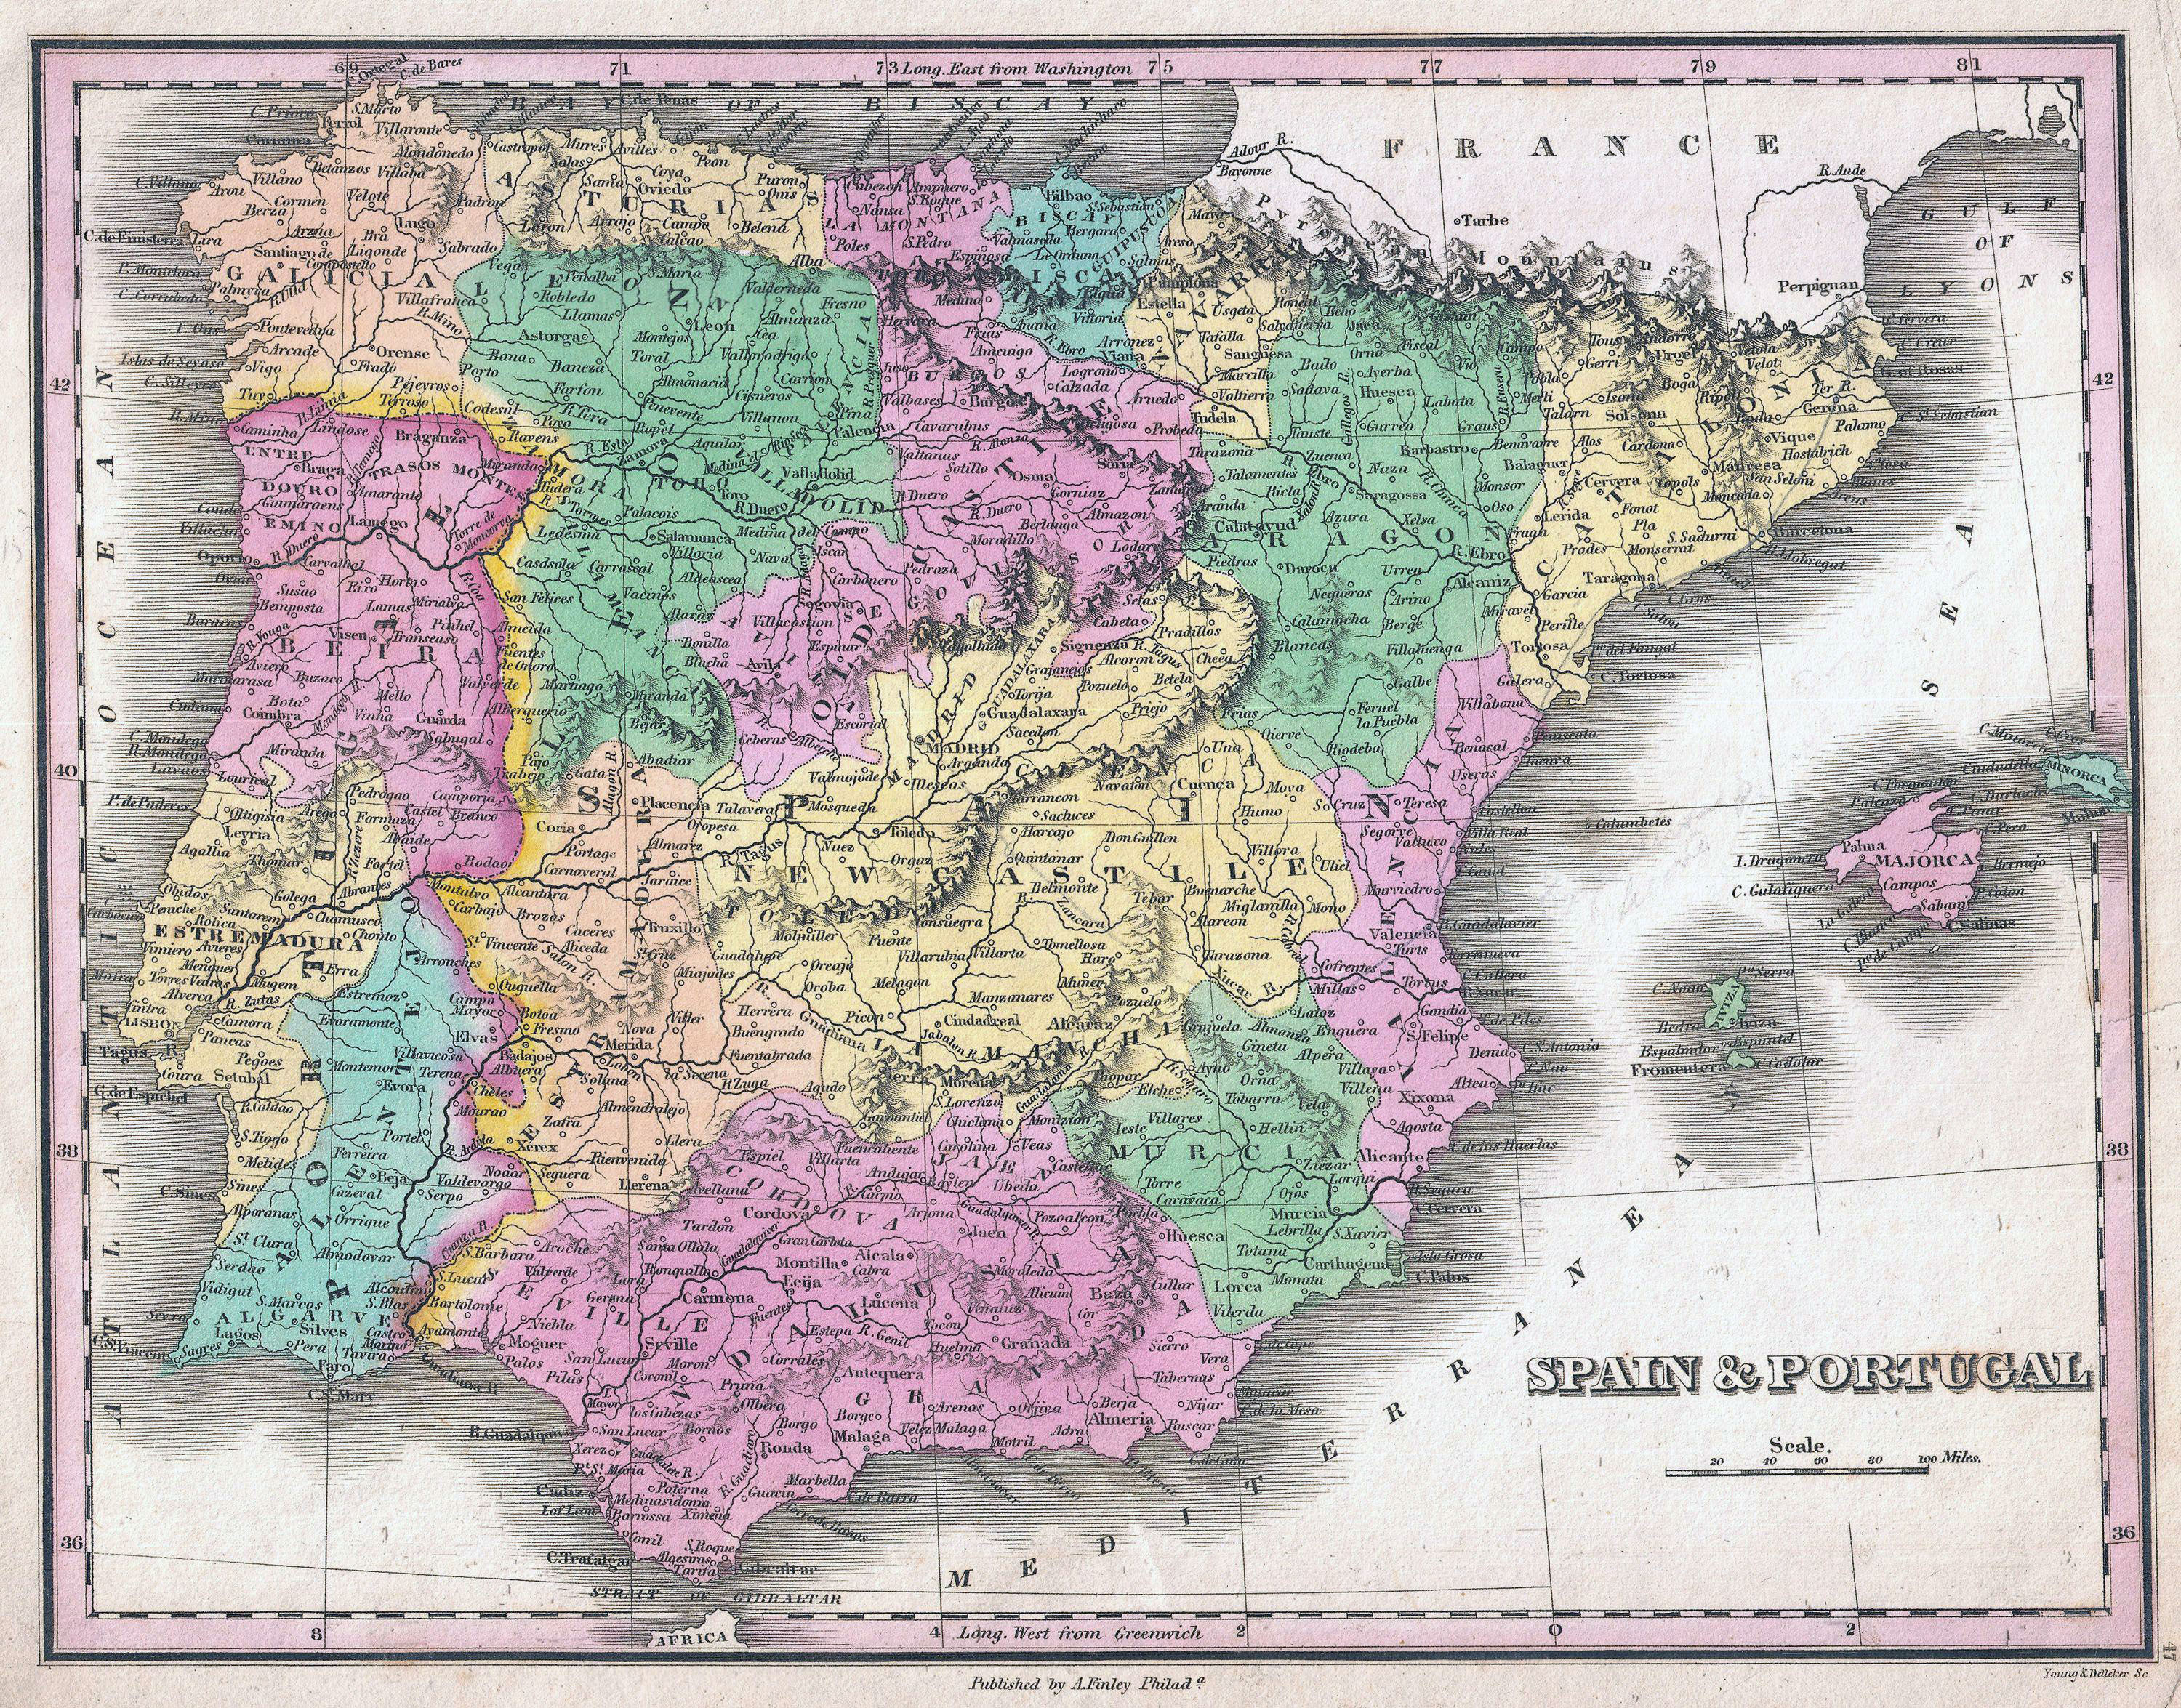 Large Detailed Old Political And Administrative Map Of Spain And Portugal With Cities 1827 Spain Europe Mapsland Maps Of The World